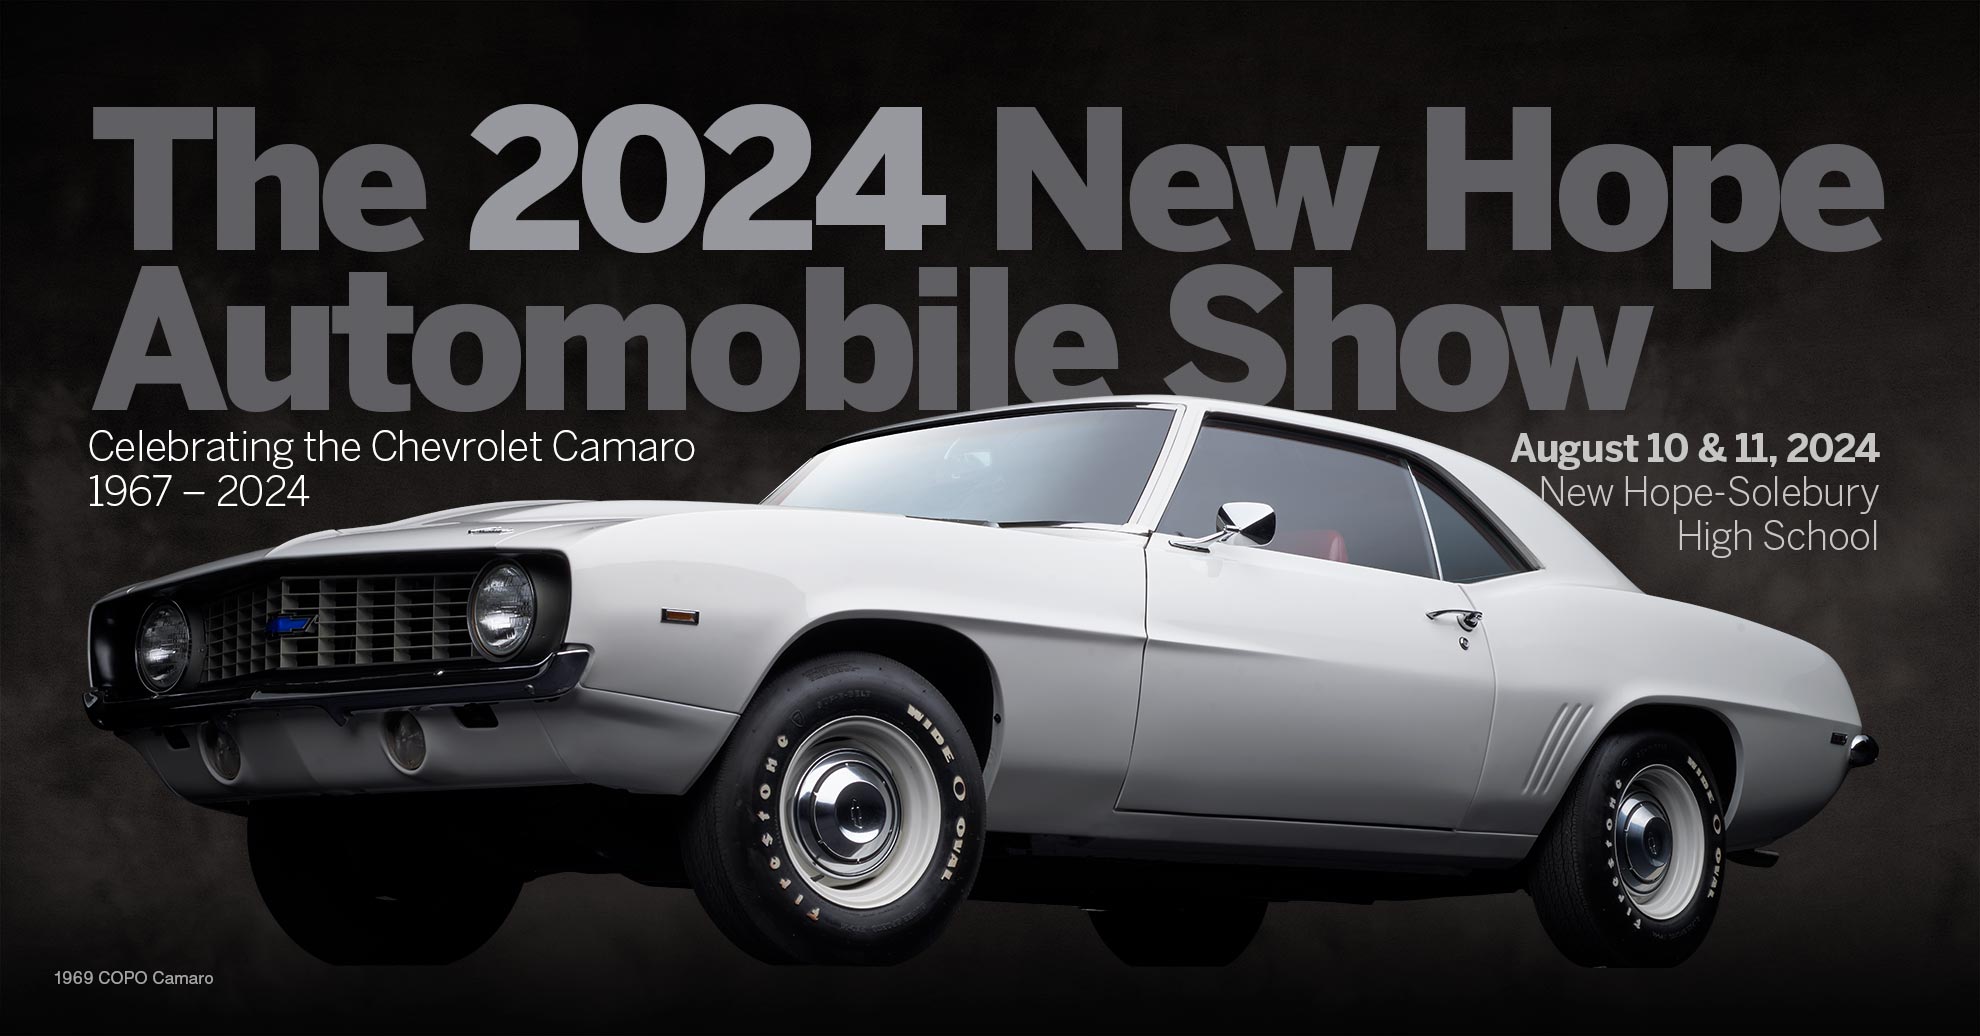 The 2024 New Hope Automobile Show poster featuring a 1969 COPO Camaro